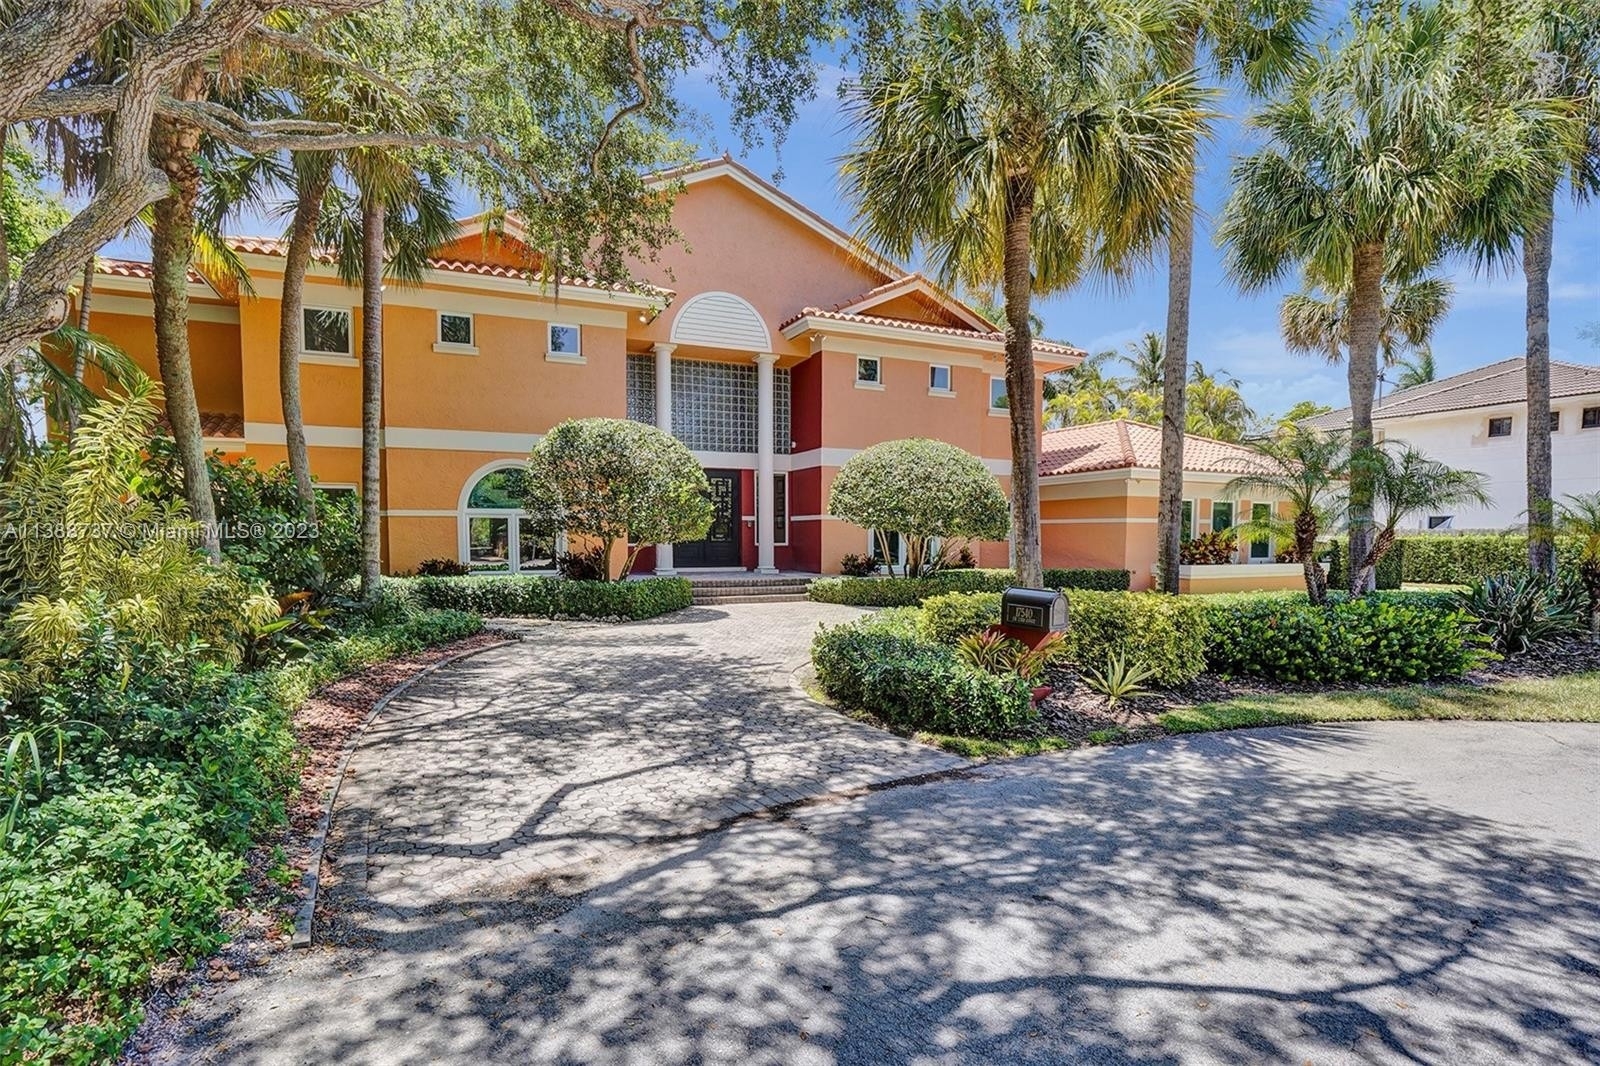 Single Family Home for Sale at Palmetto Bay, Florida 33157